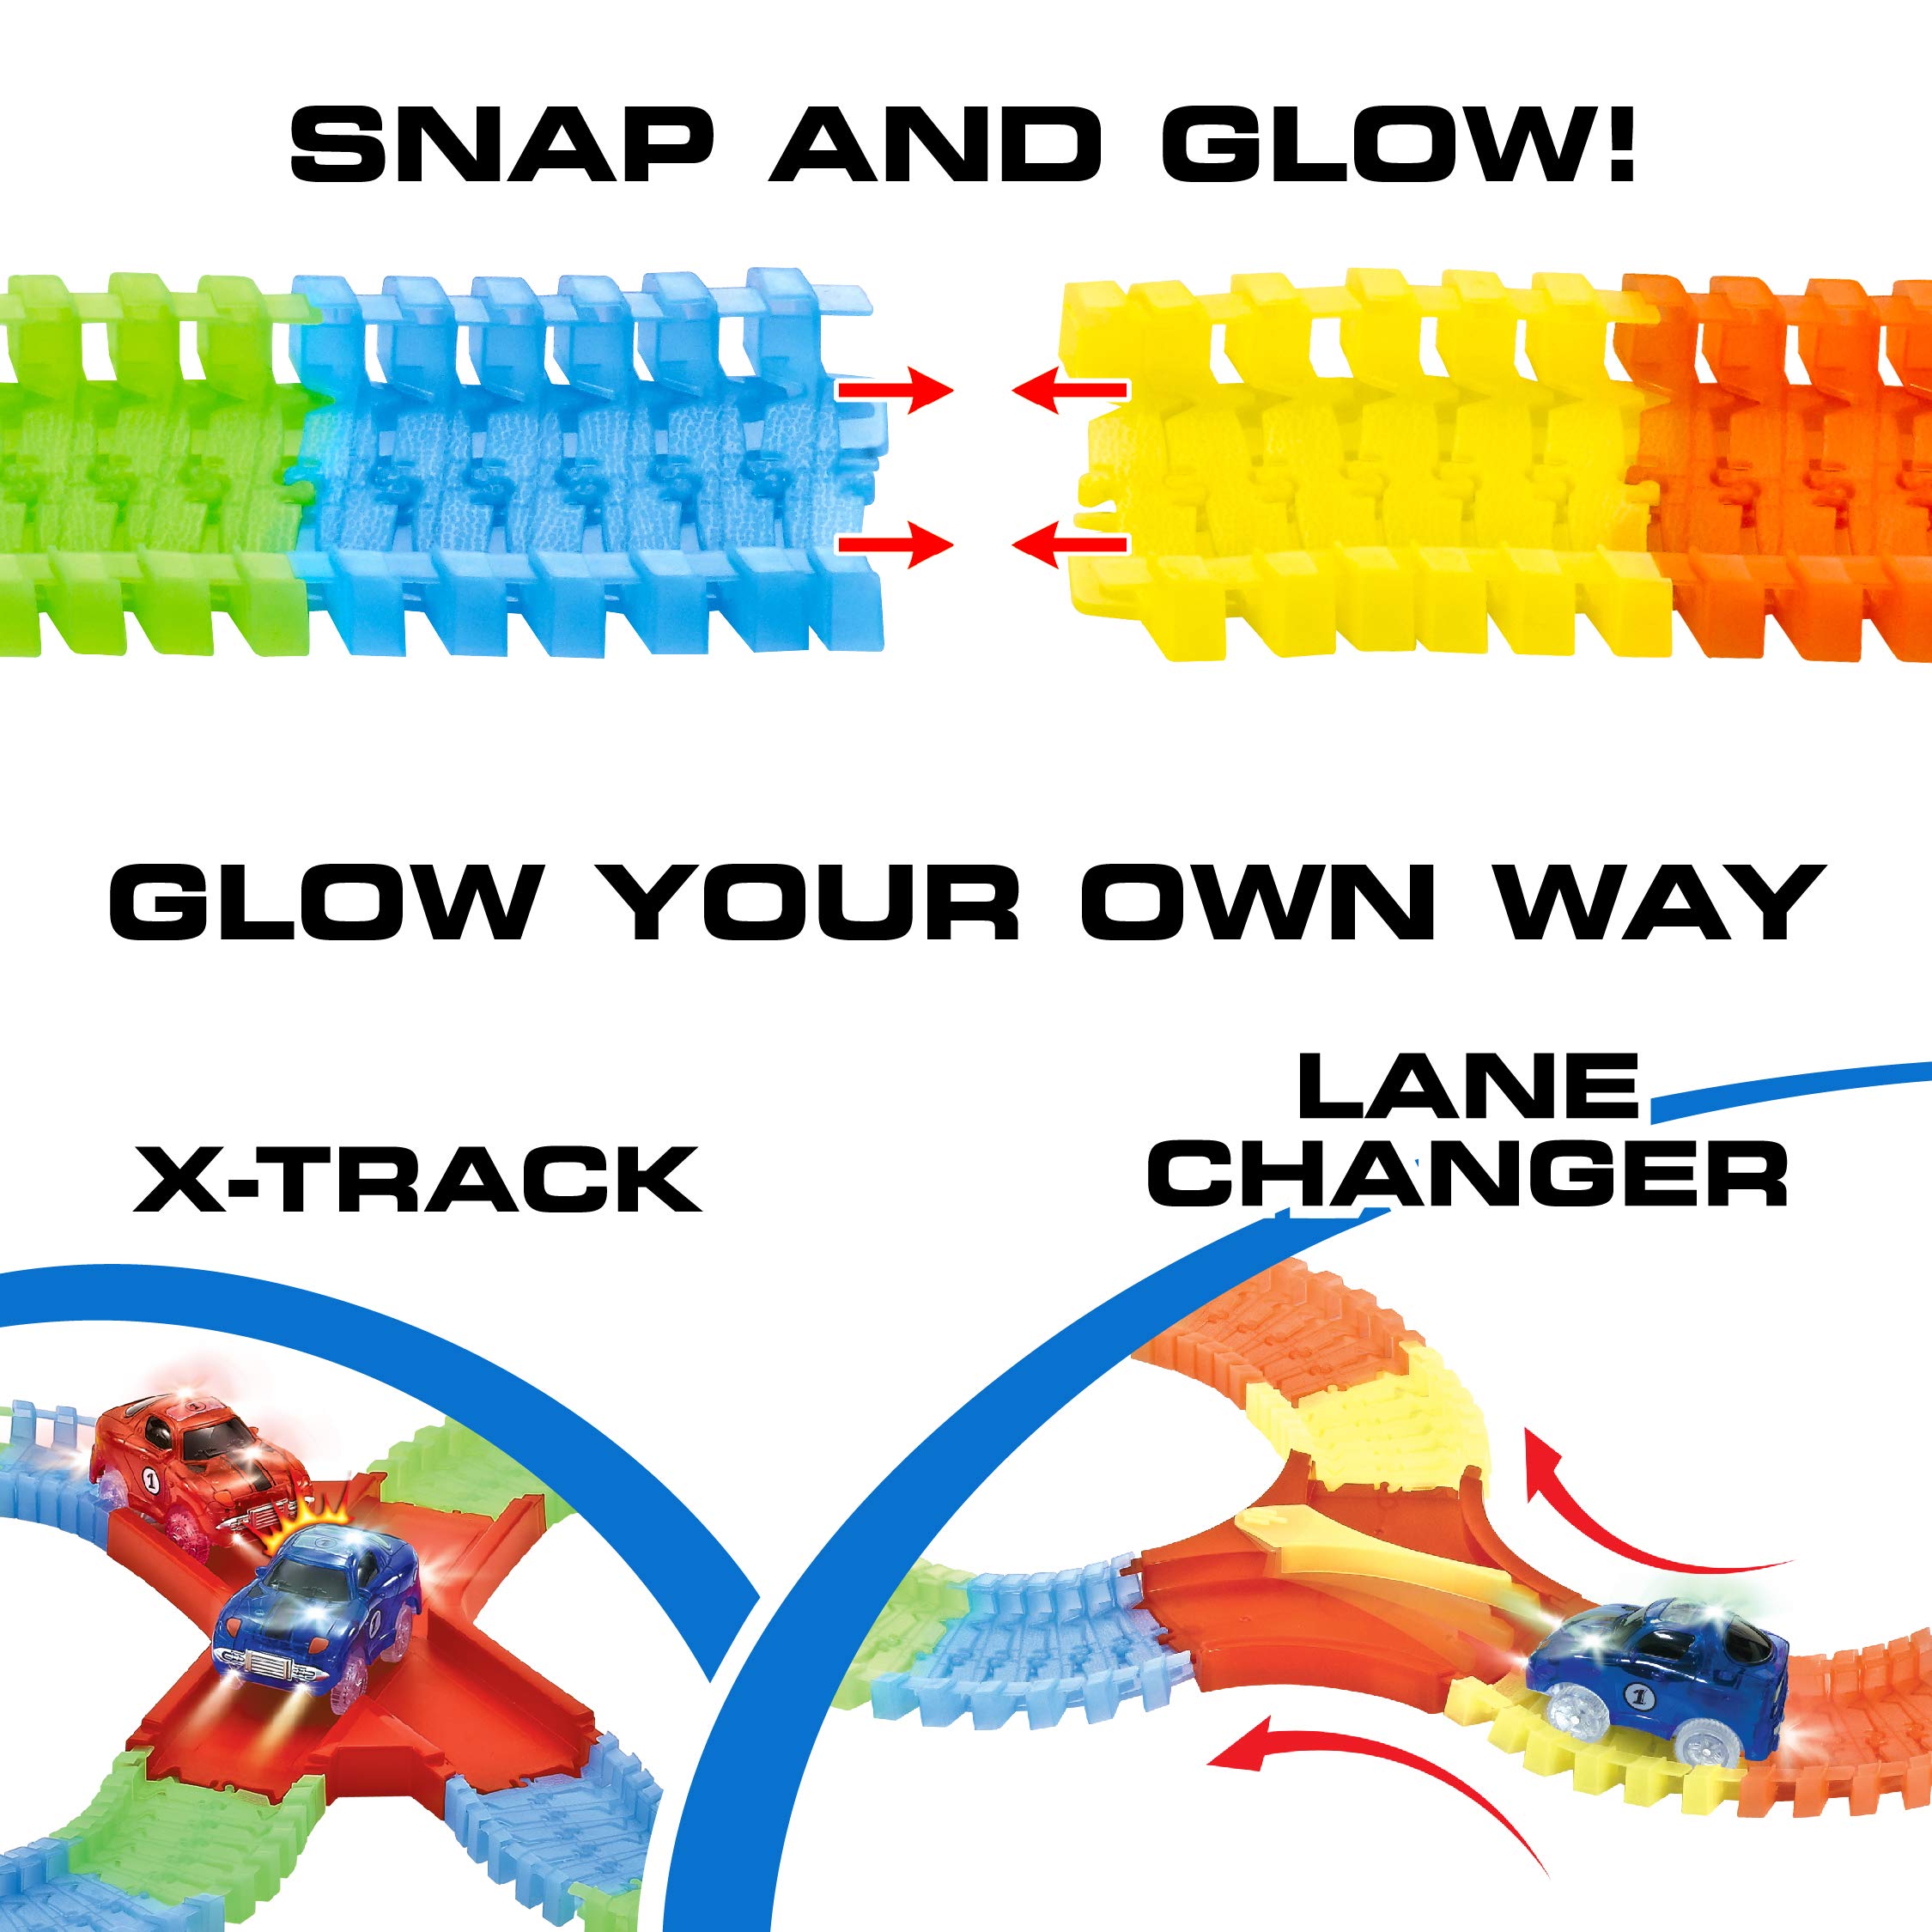 USA Toyz Glow Race Tracks for Boys or Girls - 360pk Glow in The Dark Flexible Rainbow Race Track Set w/ 2 Light Up Toy Cars and